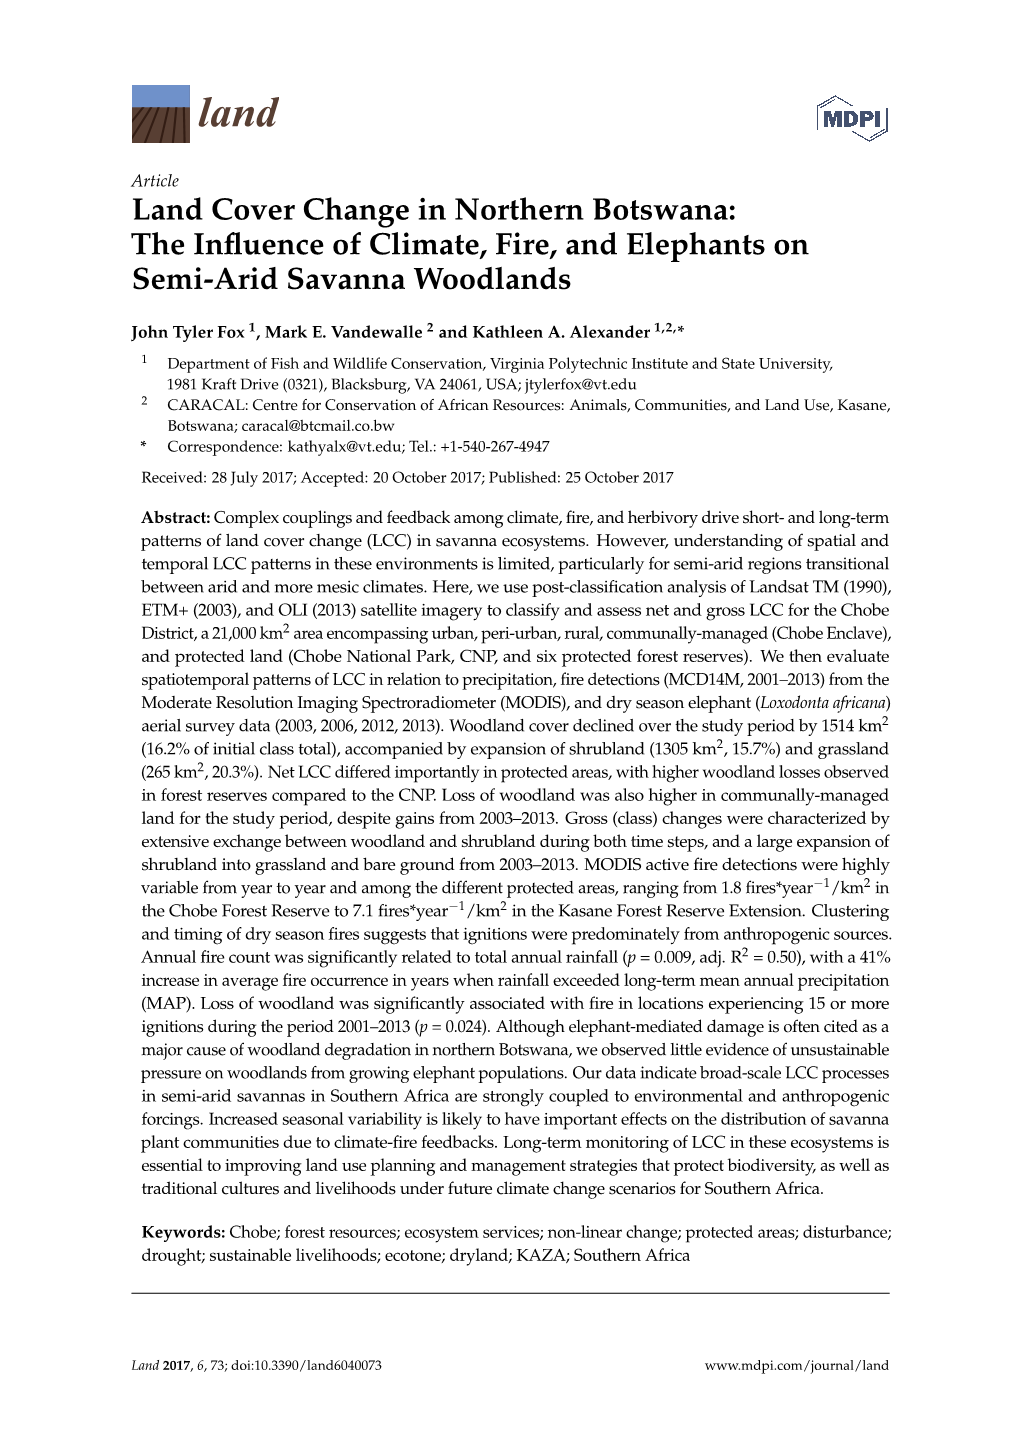 Land Cover Change in Northern Botswana: the Inﬂuence of Climate, Fire, and Elephants on Semi-Arid Savanna Woodlands